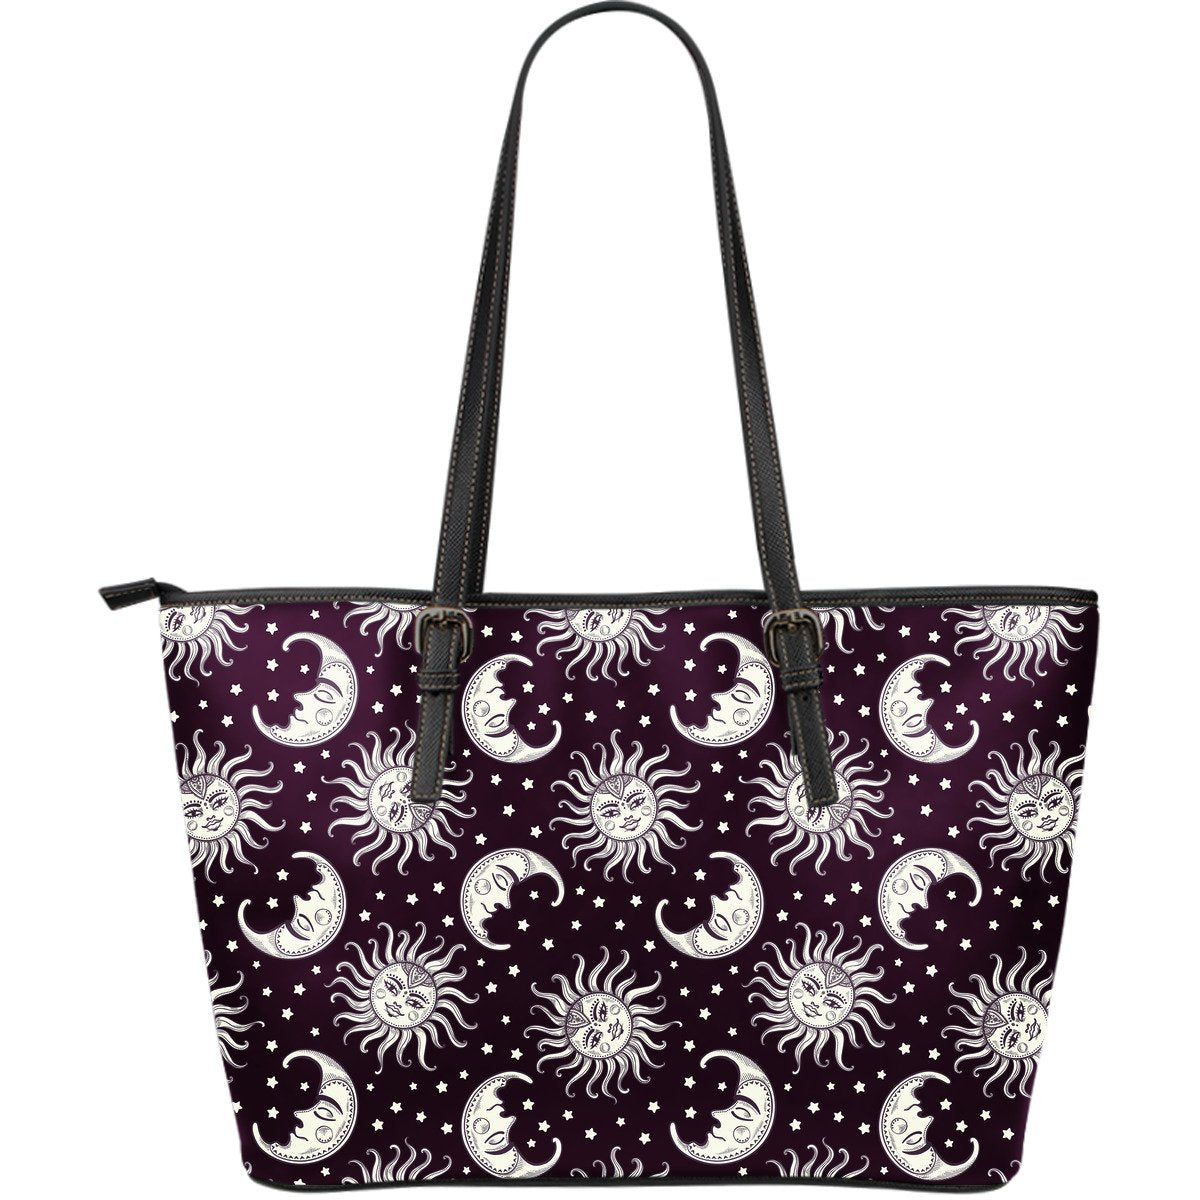 Sun Moon Face Large Leather Tote Bag